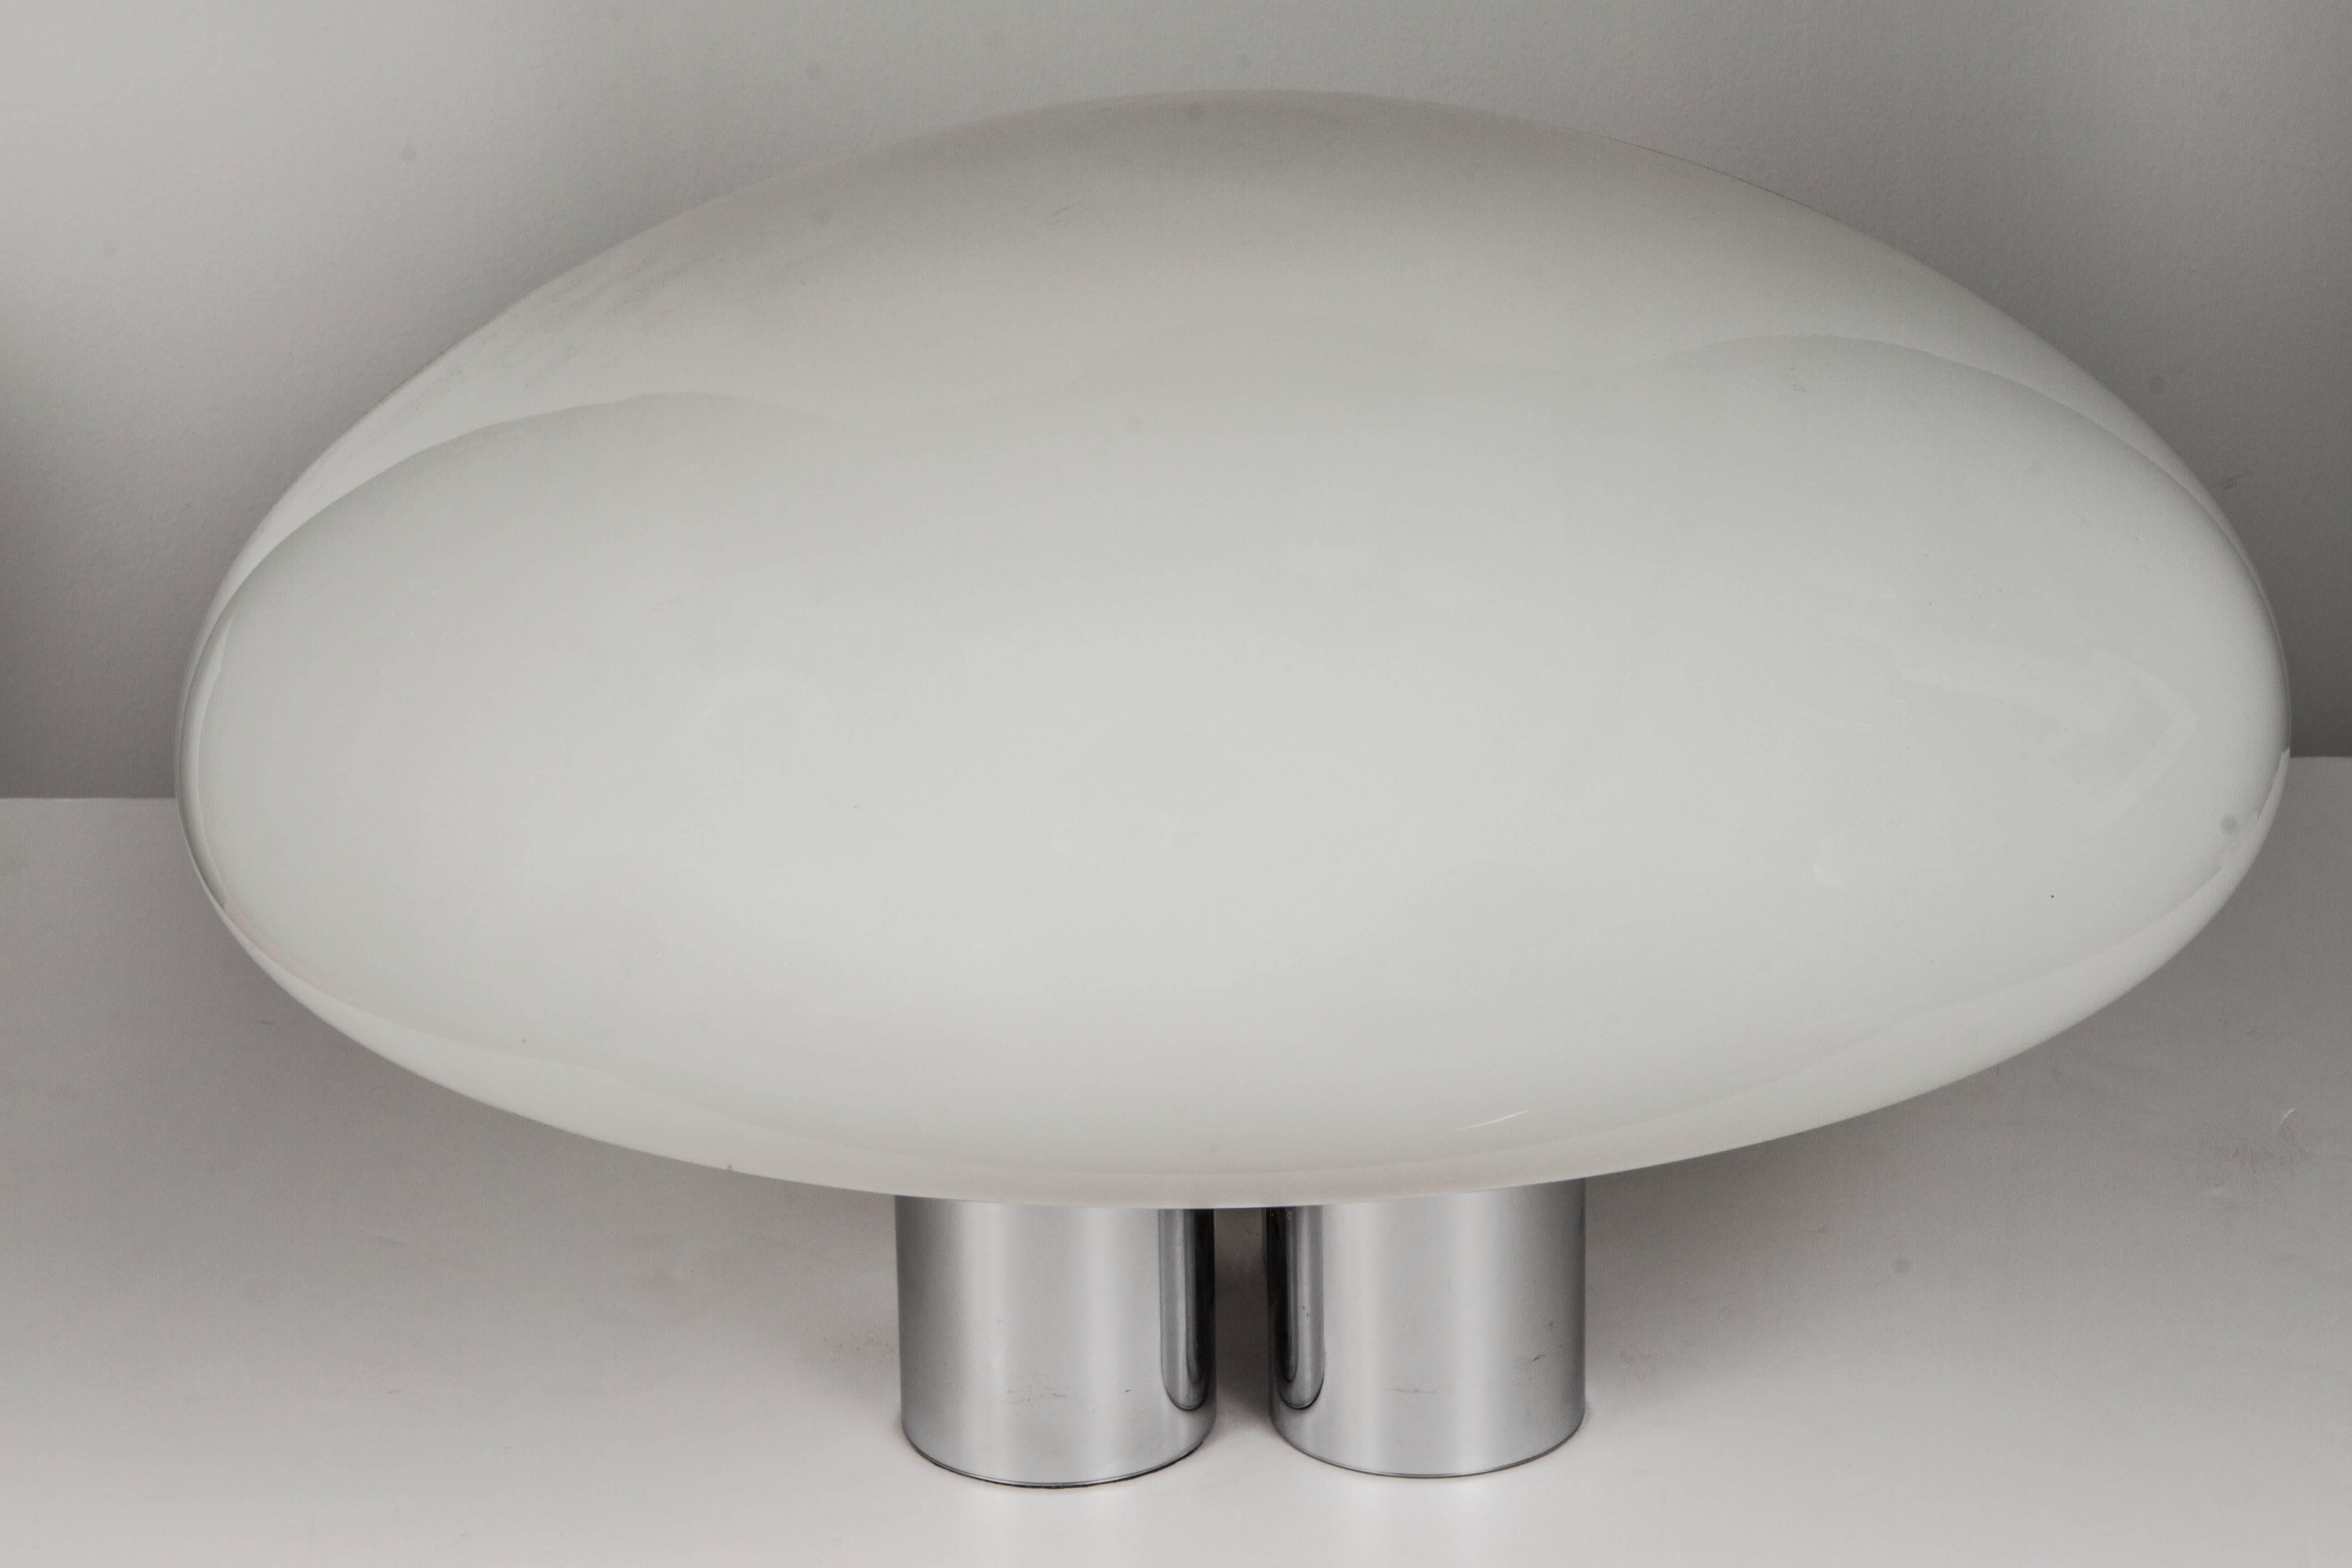 Large Sergio Mazza 'Magnolia' table lamp for Quattrifolio c. 1971. This is the largest size the lamp was made in. Executed in a seemingly floating bilious handblown opaline glass shade over a four pillar chromed base for Quattrifolio, Italy.